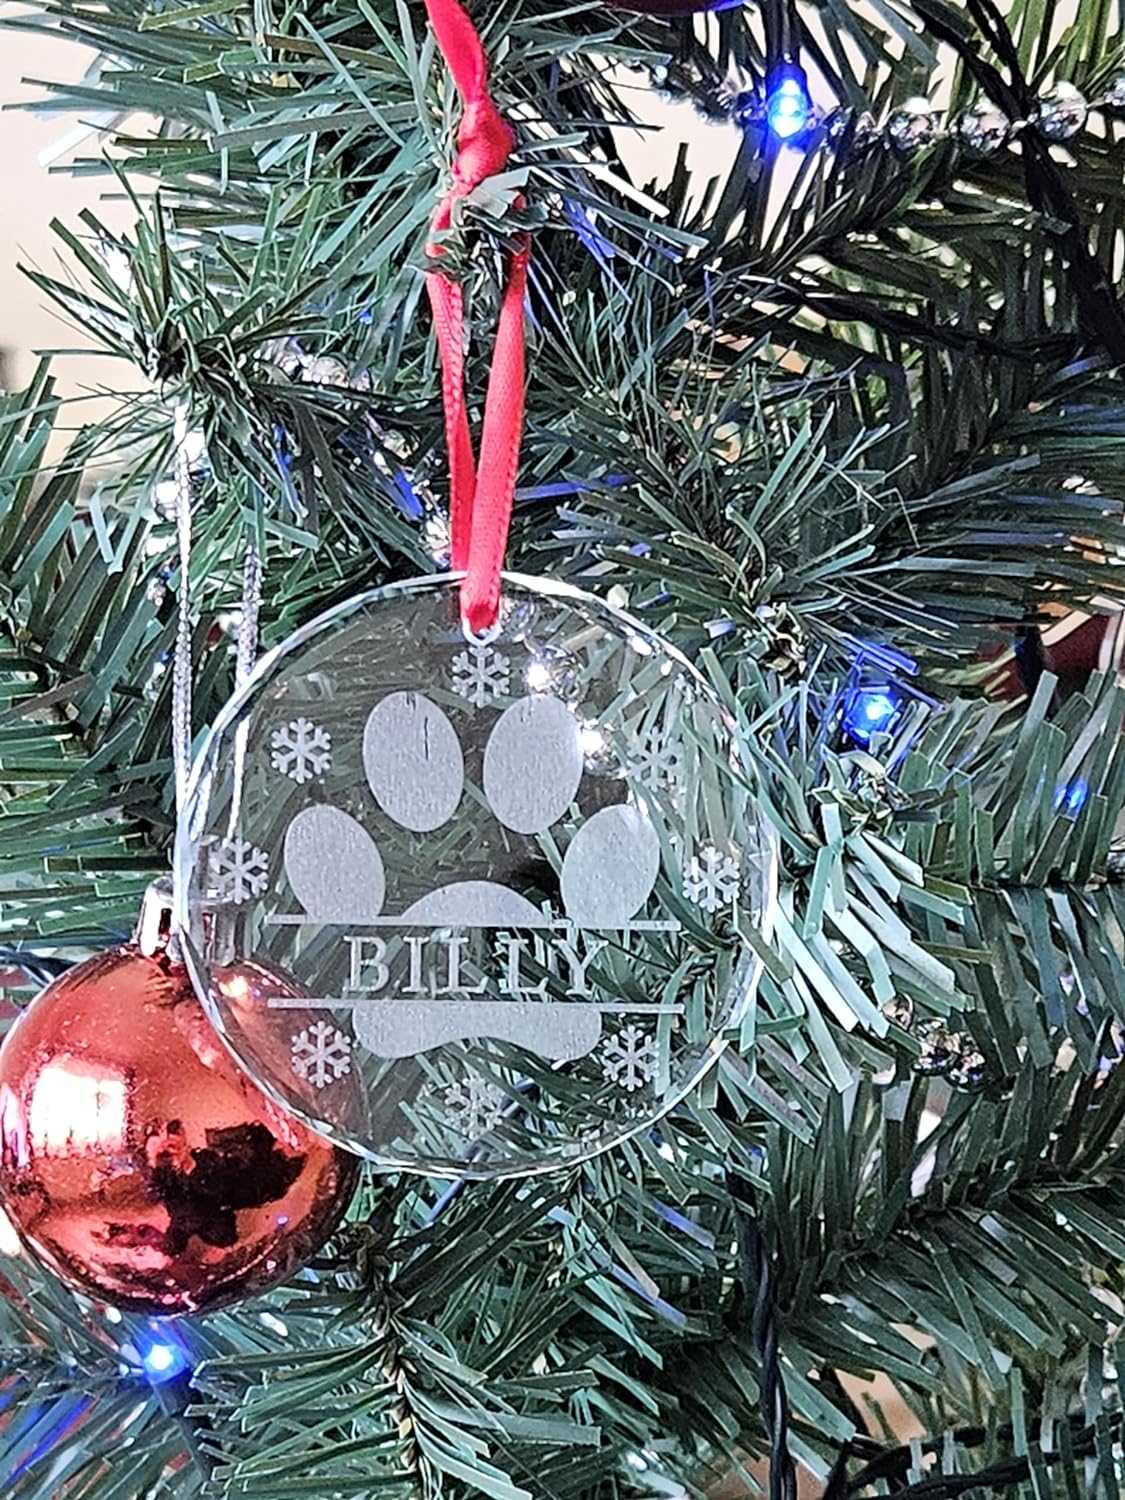 Personalised Crystal paw print hanging ornament - 6cm